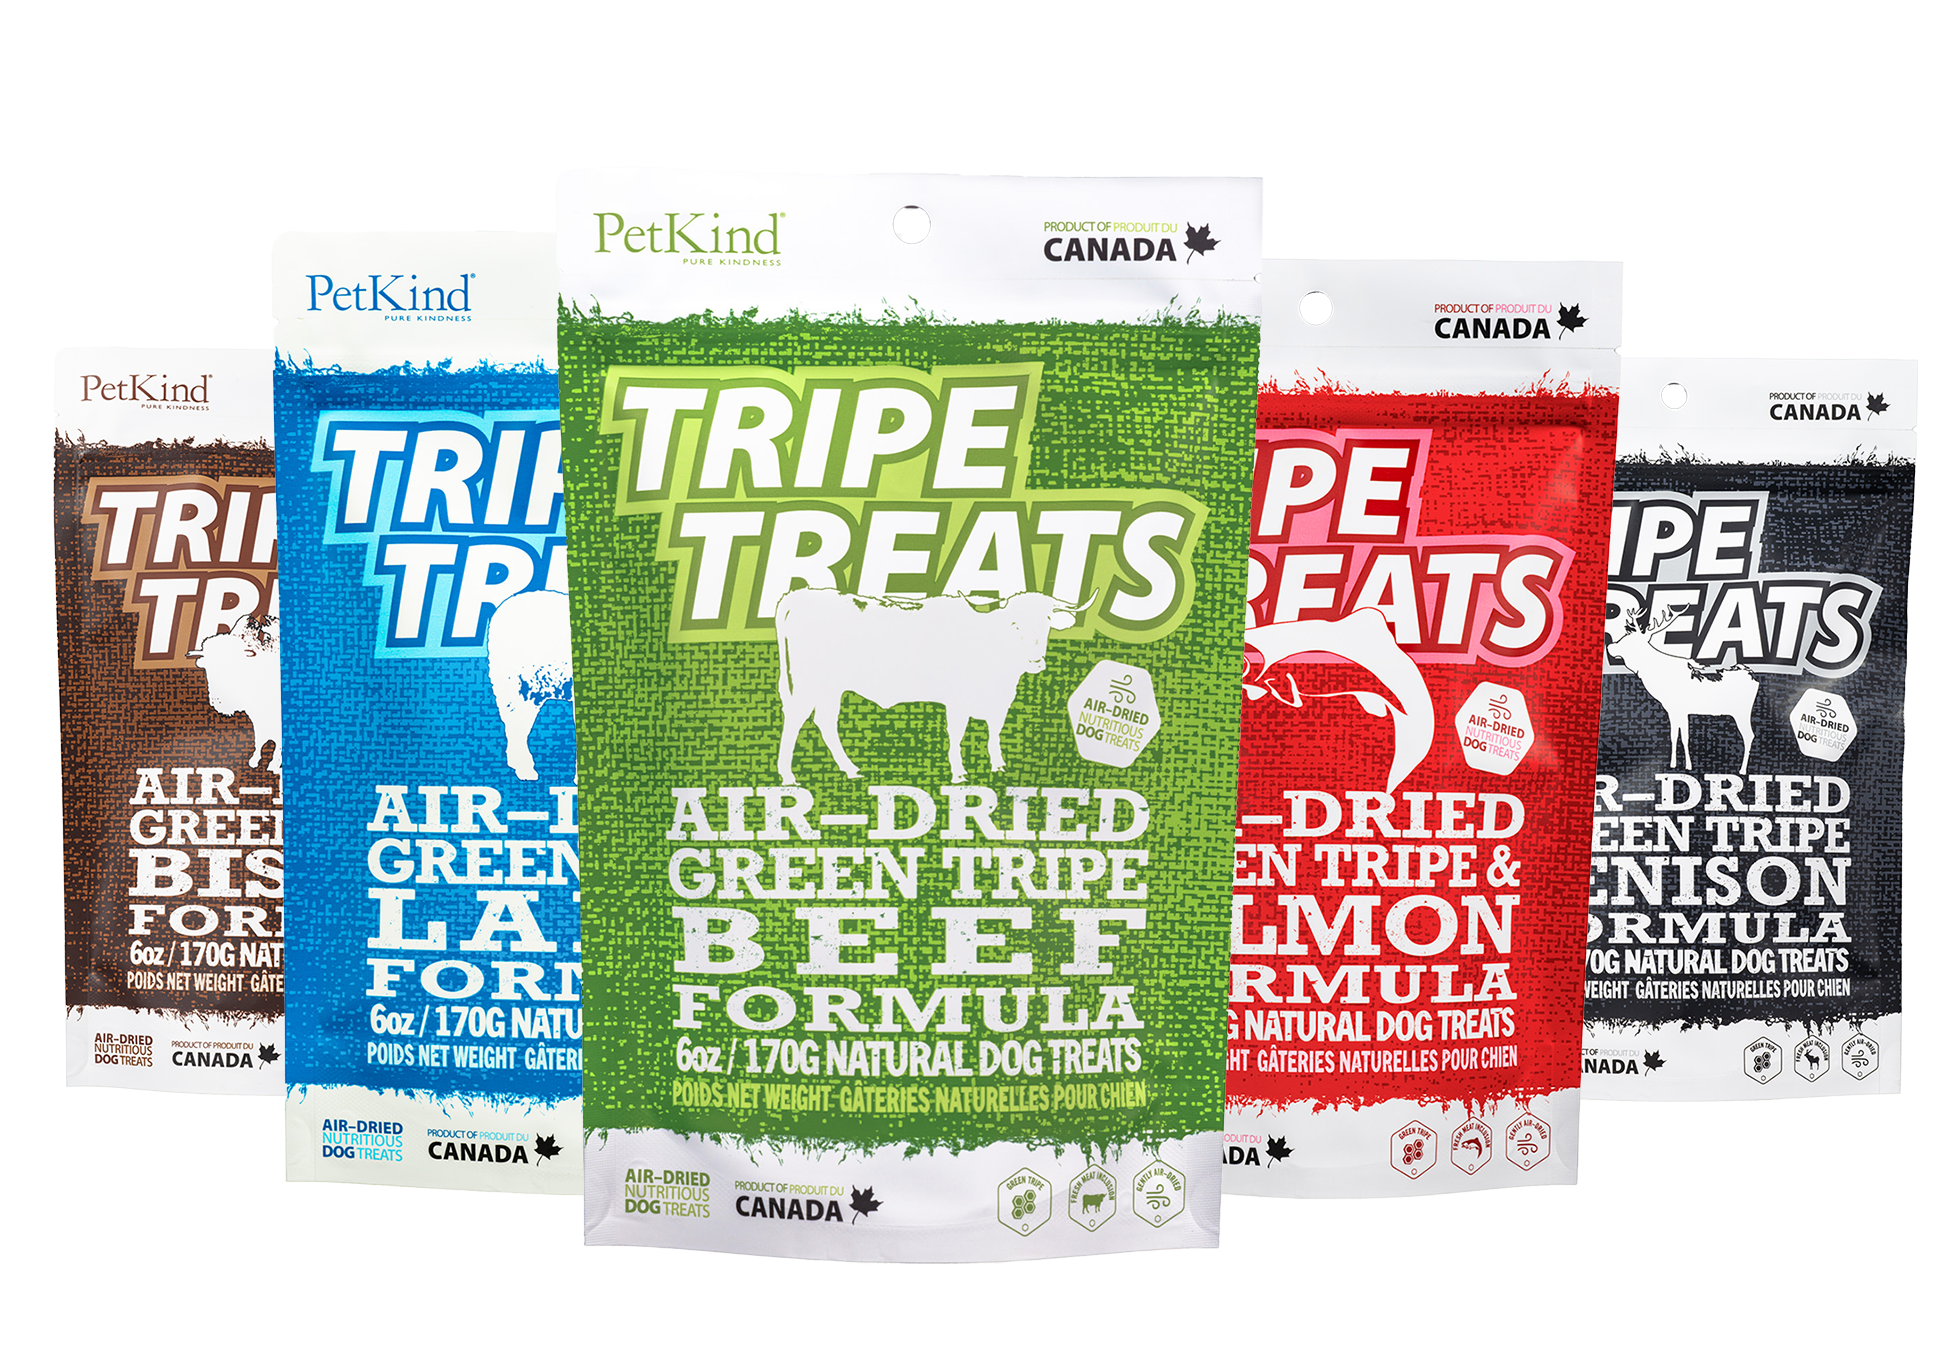 6 oz bags of different variants of the Tripe Treat formulas.